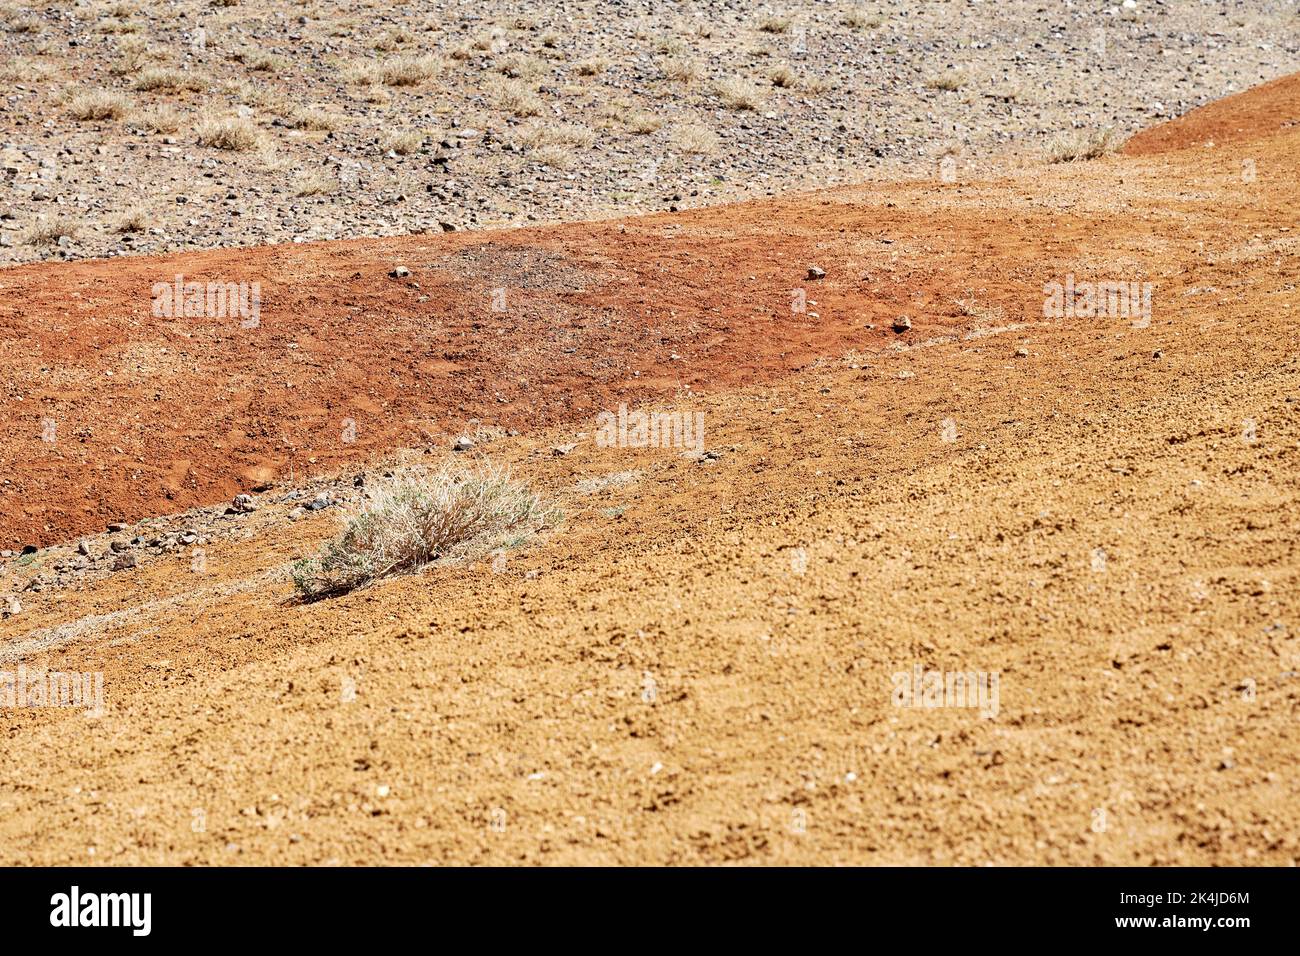 Orange and brown dry grounds and mountains. Abstract nature backgrounds Stock Photo